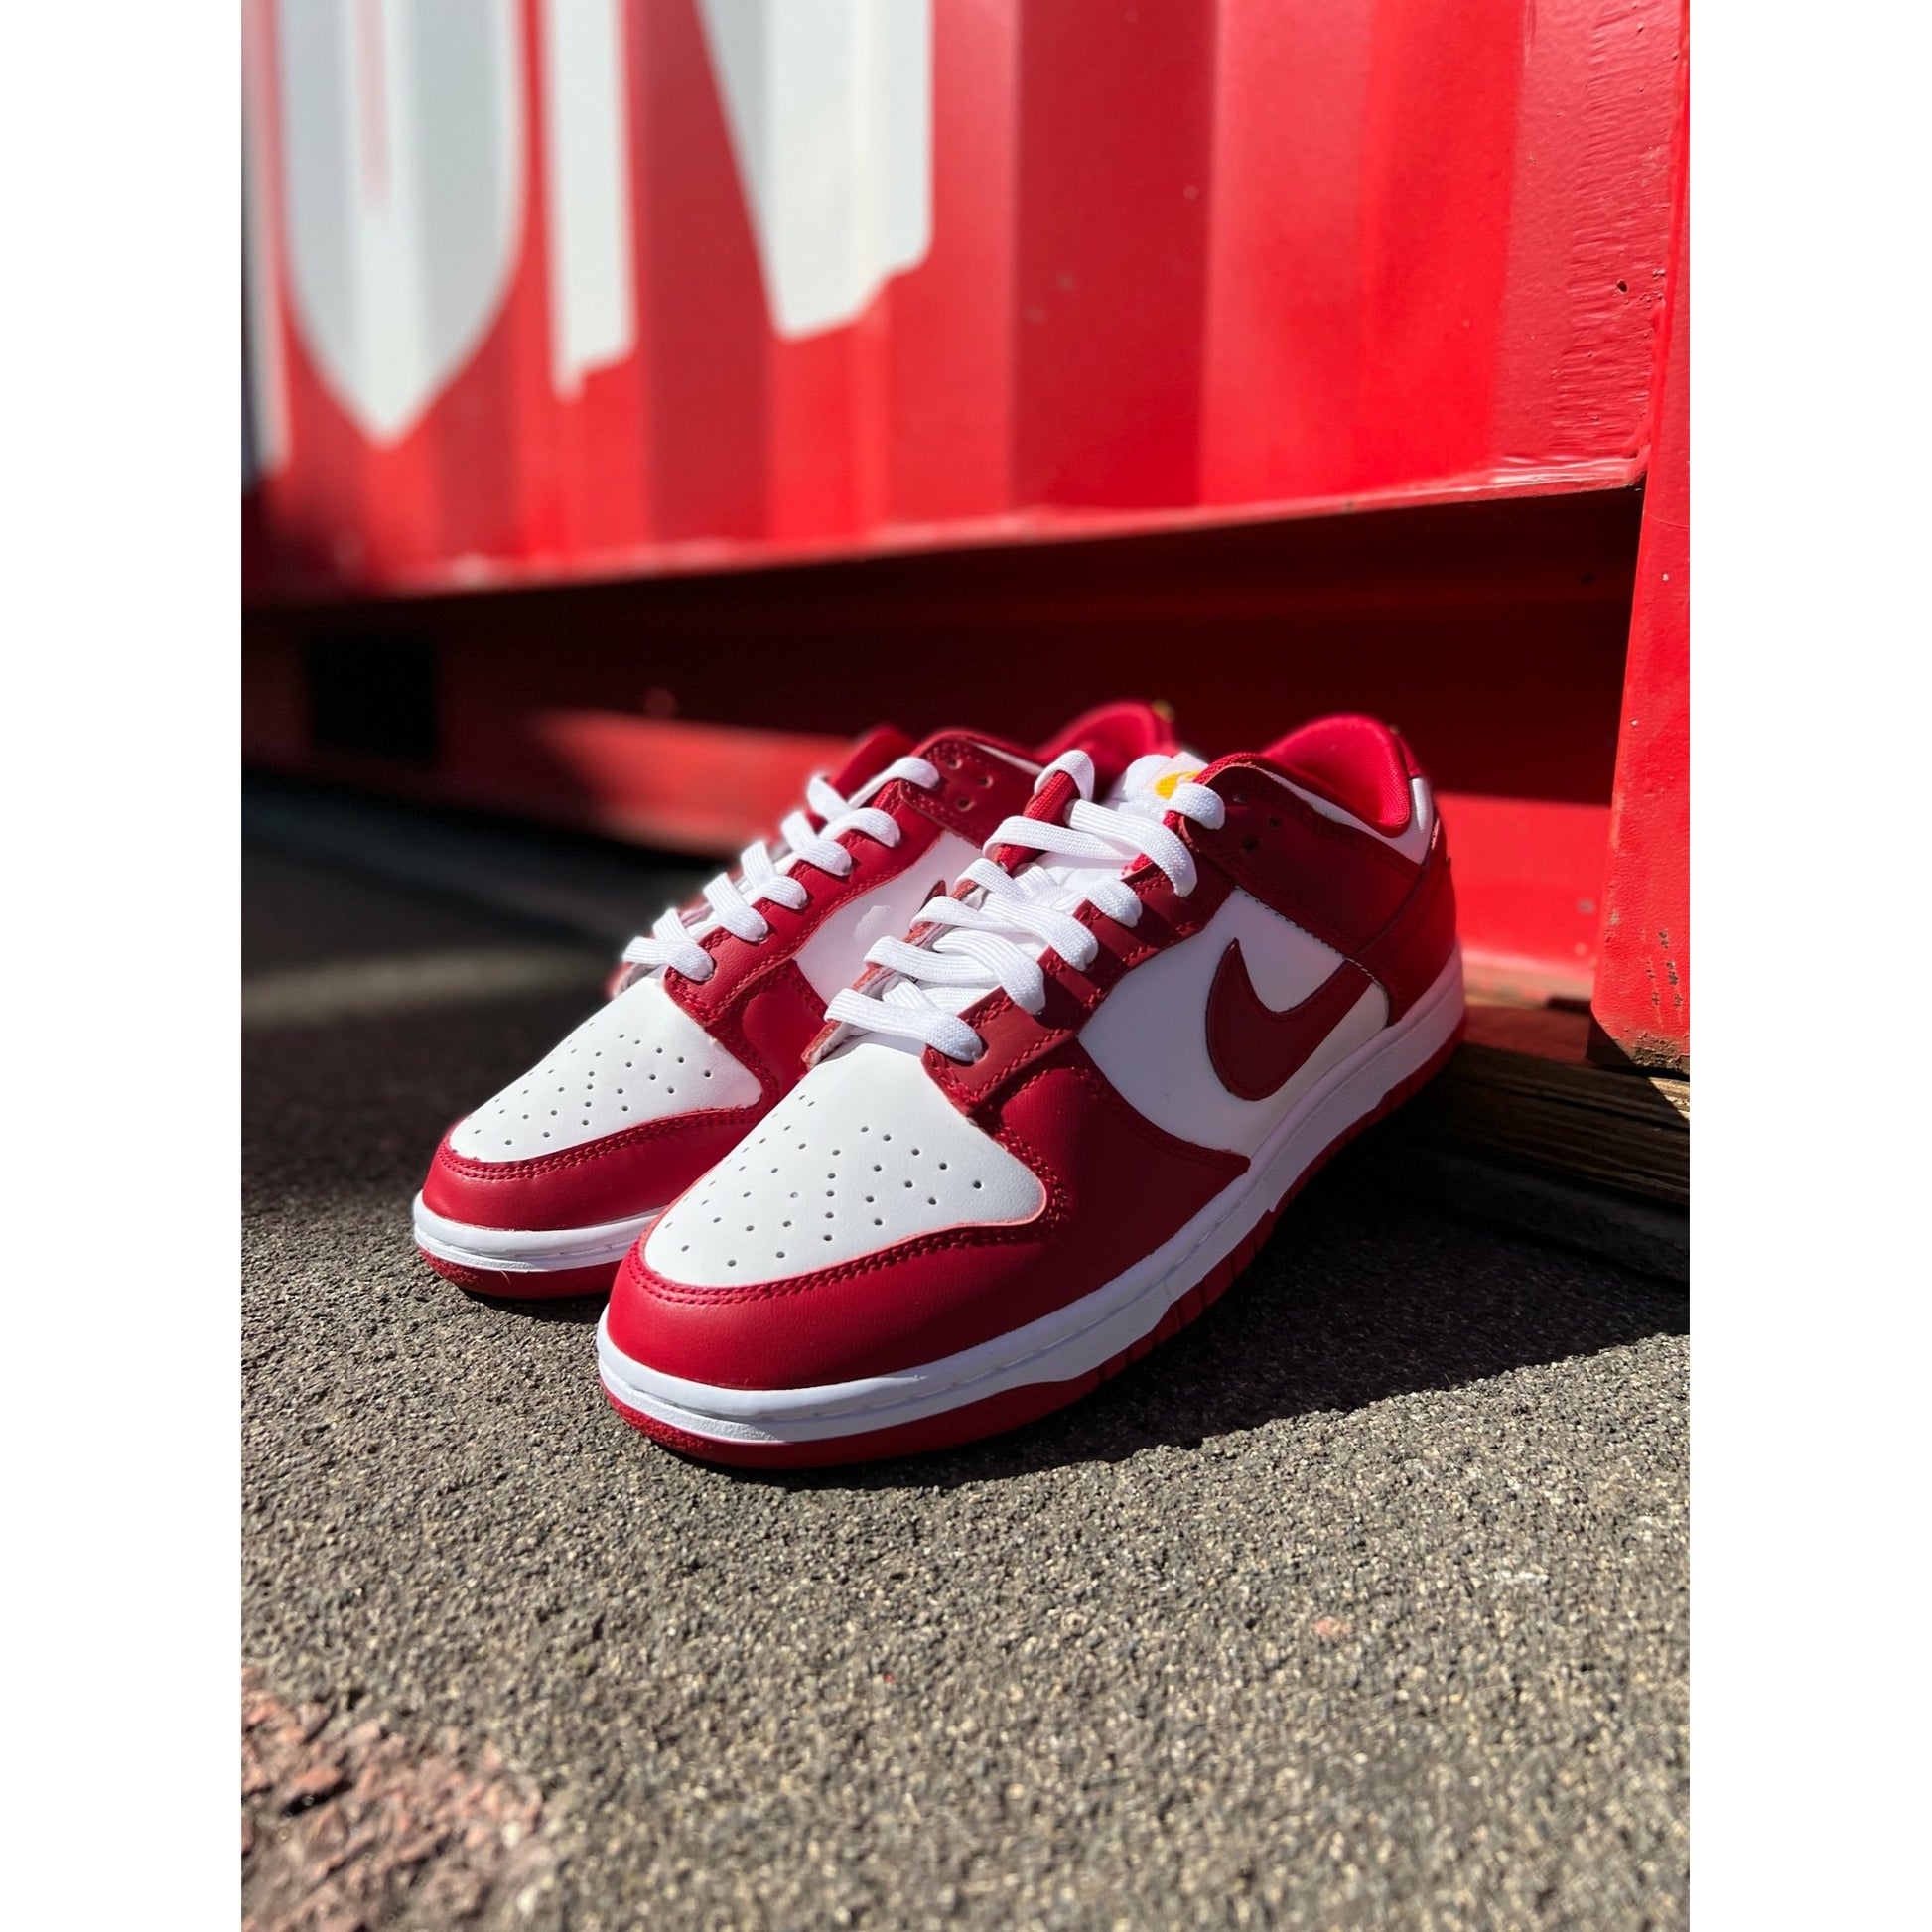 Nike Dunk Low USC Gym Red from Nike